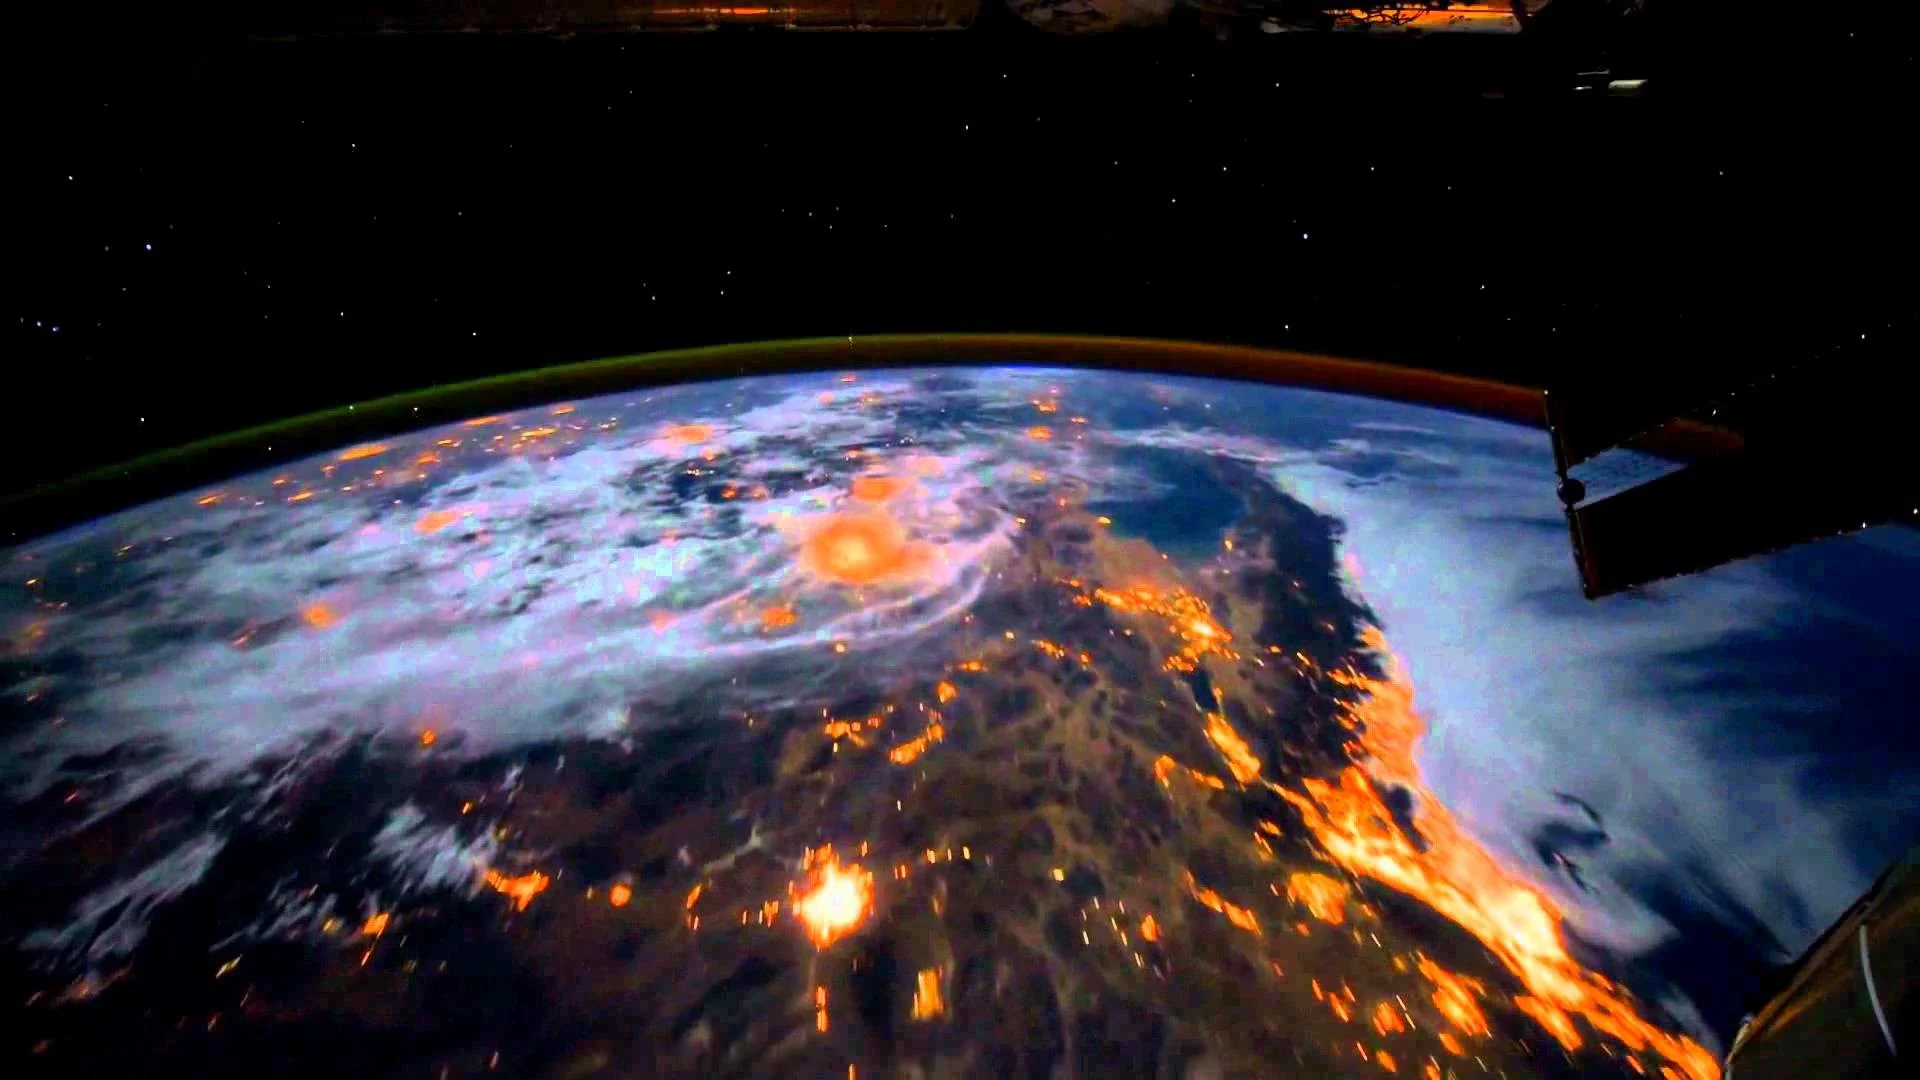 [Dreamscene] Animated Wallpaper – Earth View from the ISS – YouTube